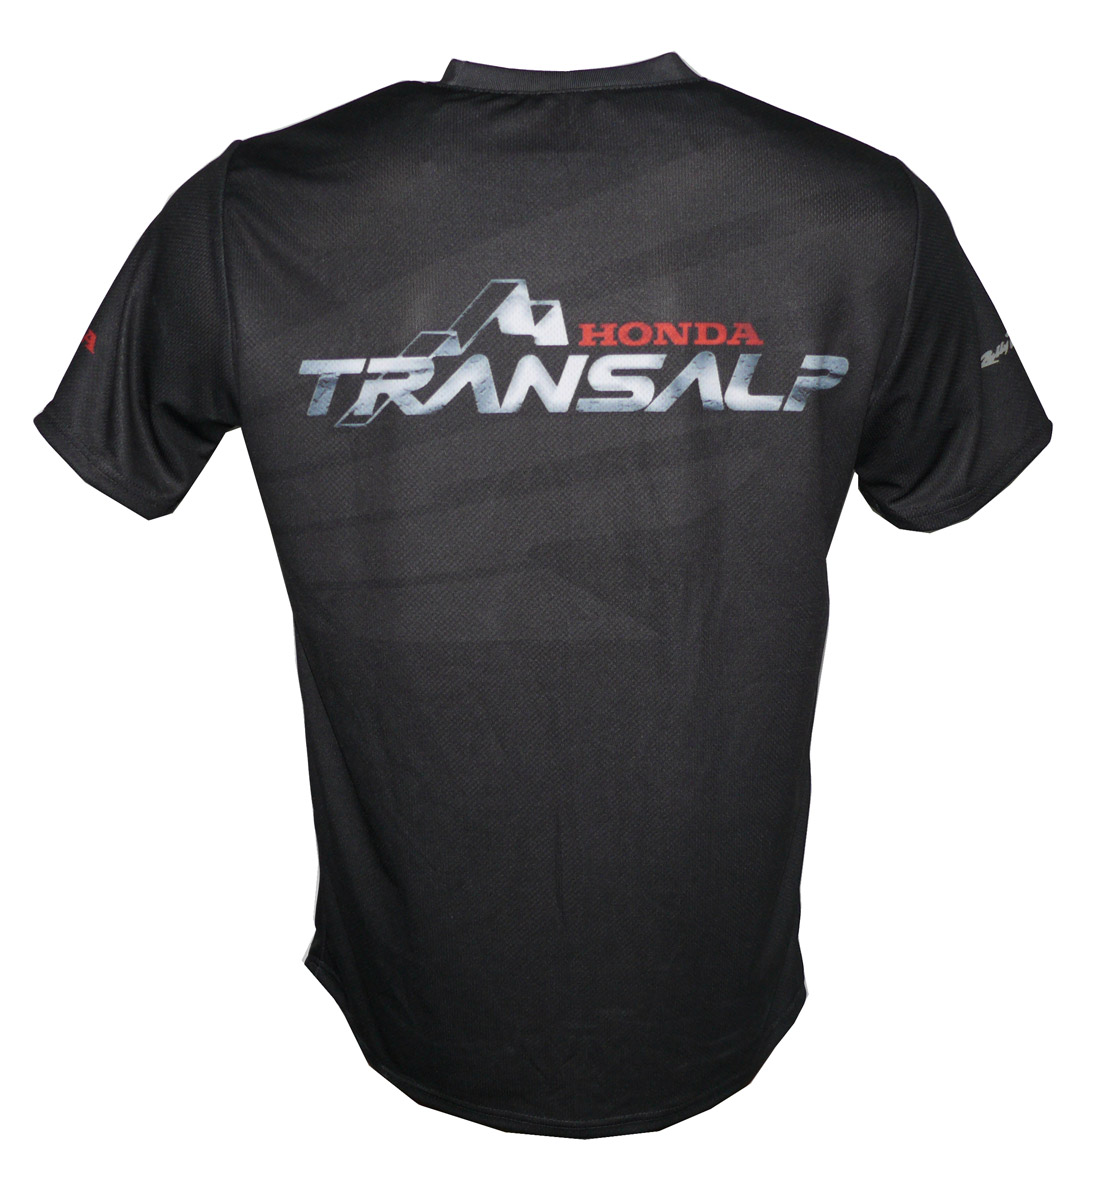 Honda XL650V Transalp t-shirt with logo and all-over printed picture ...